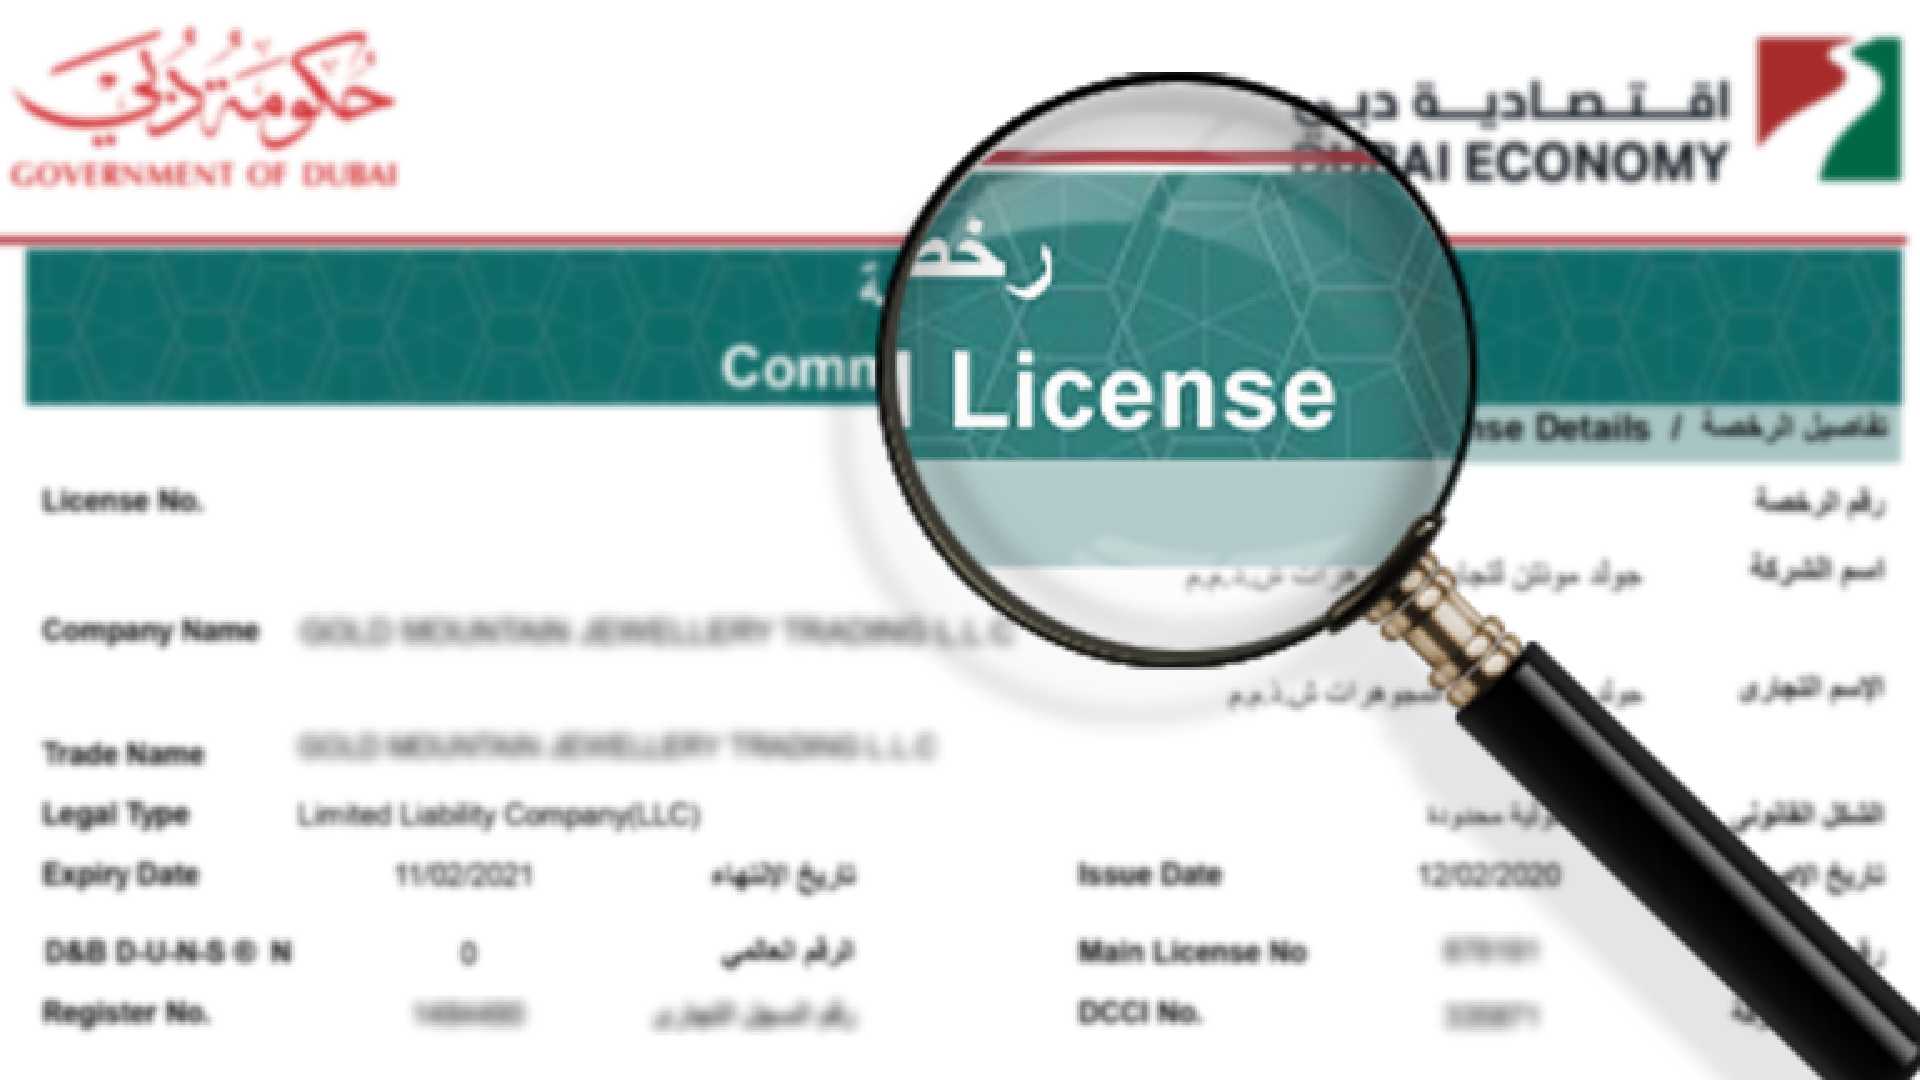 how to check trade license online